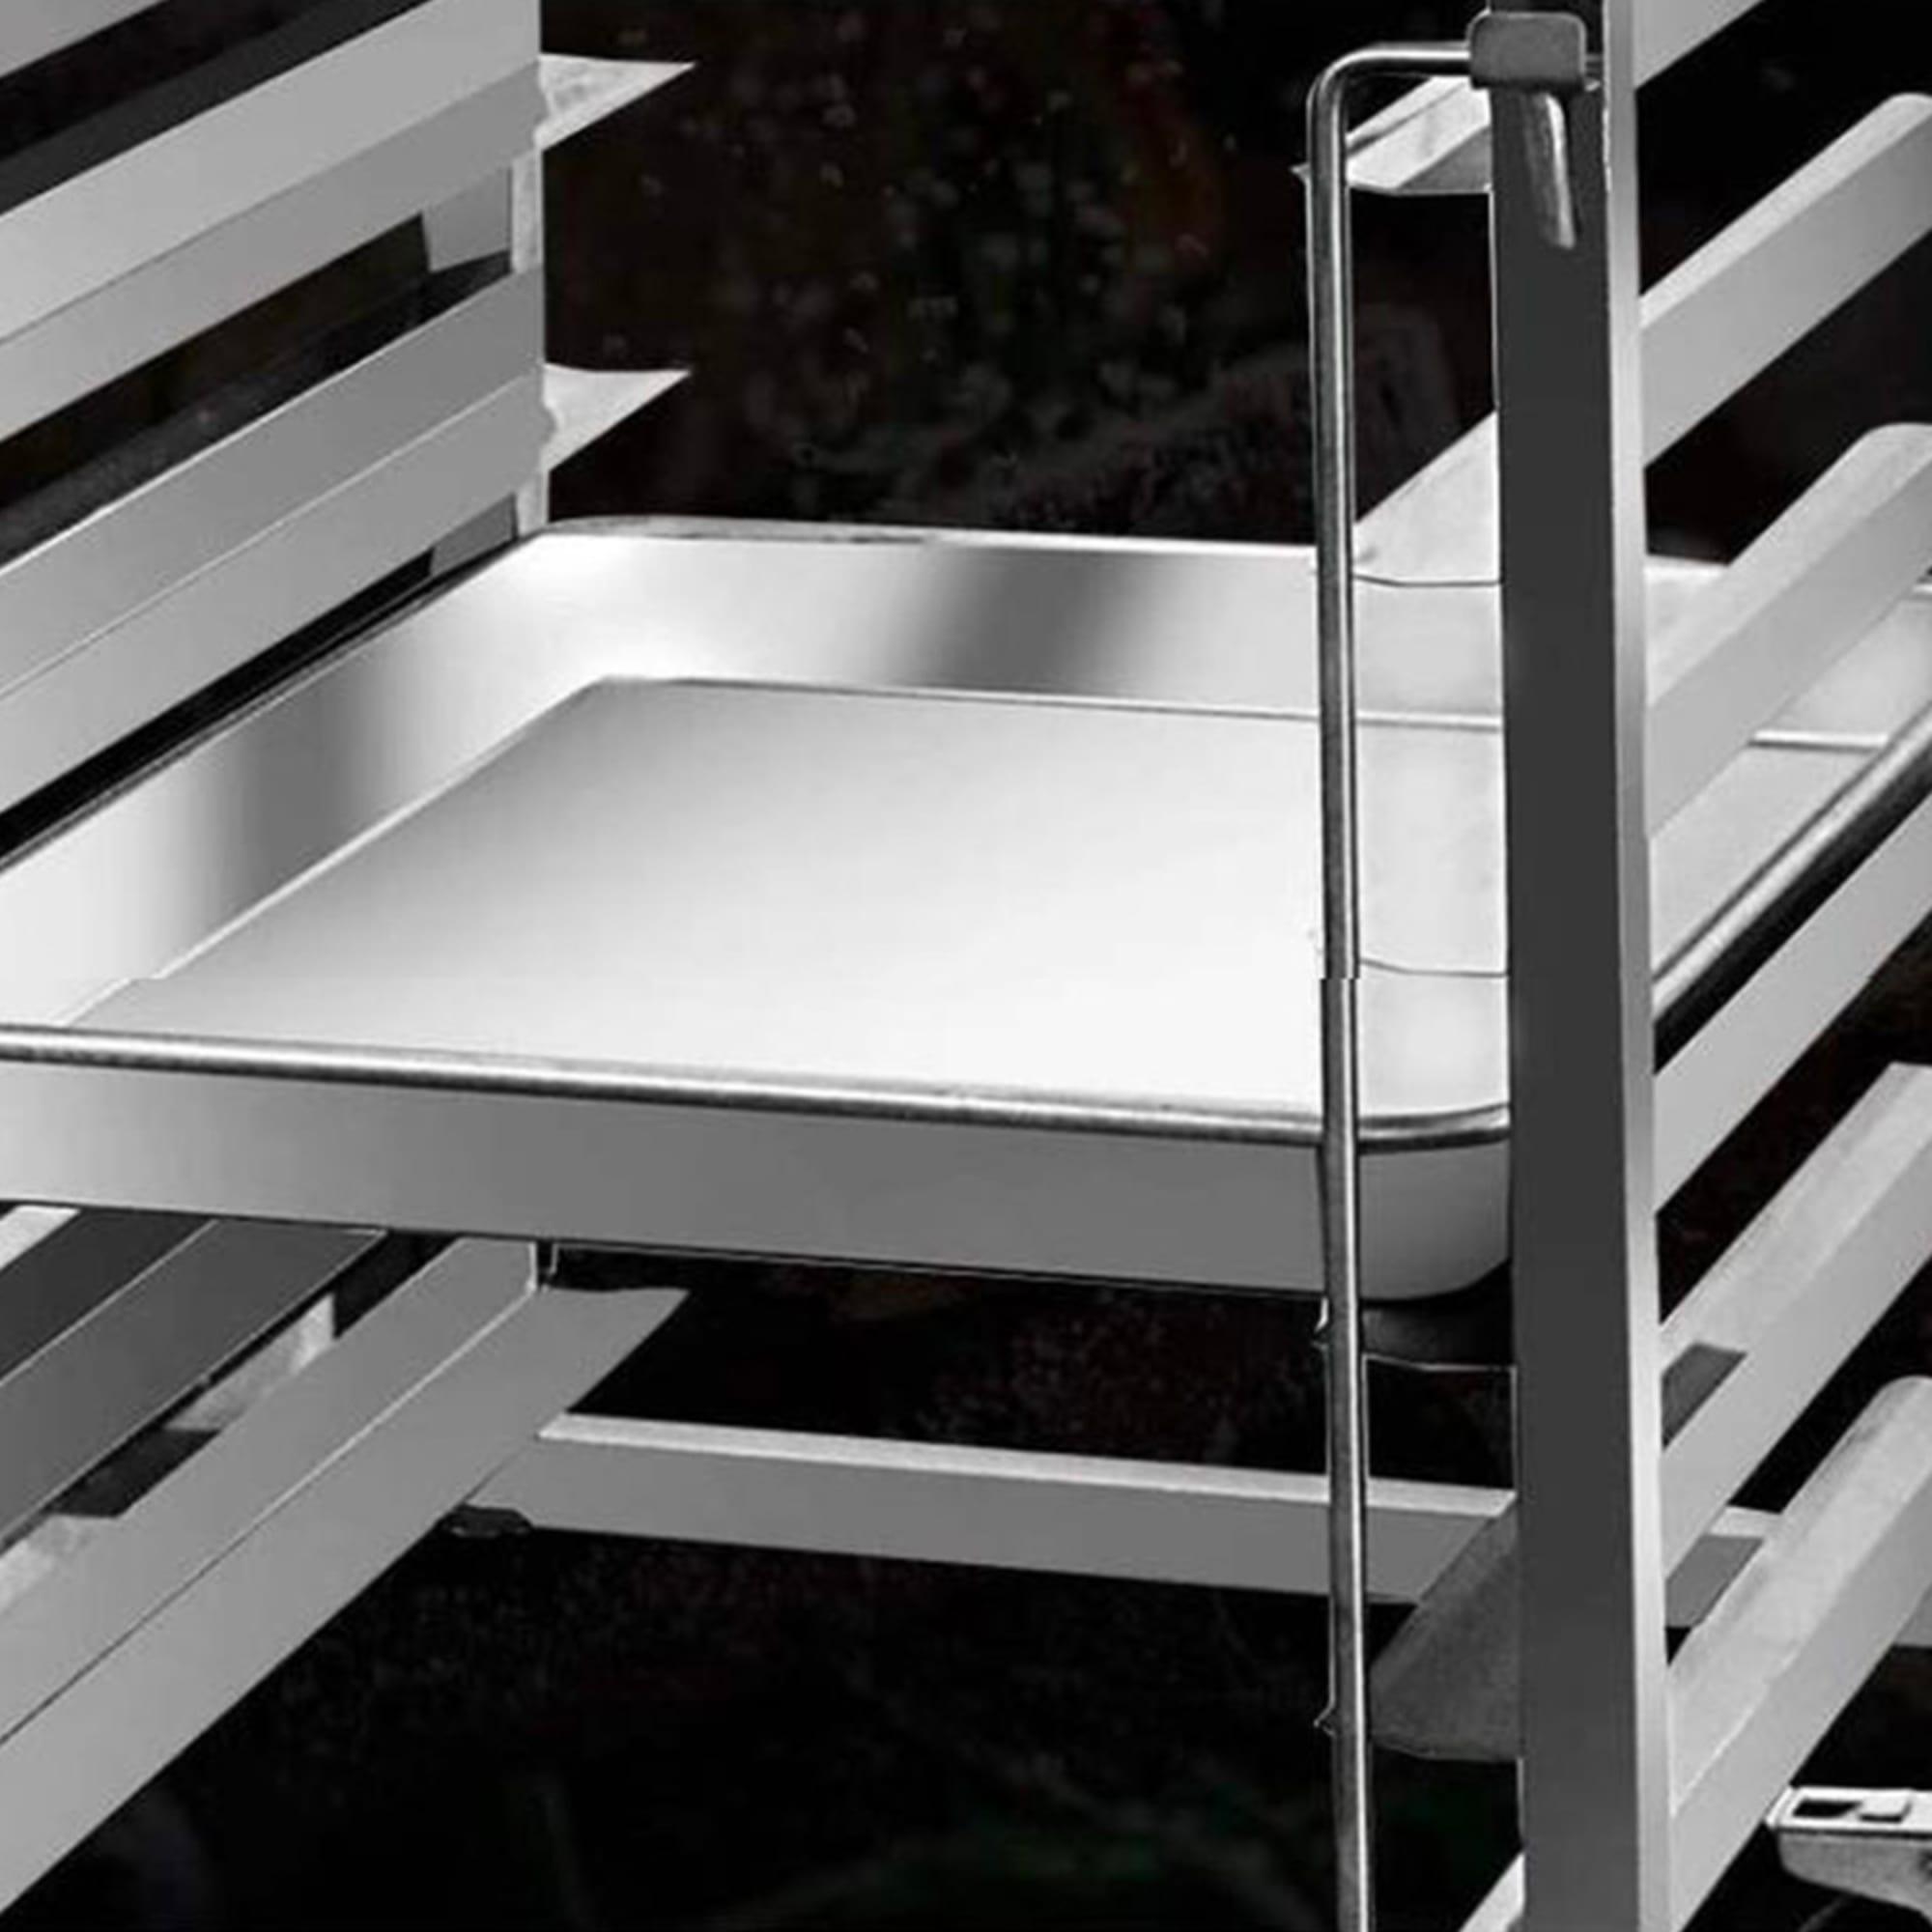 Soga Stainless Steel Gastronorm Trolley 7 Tier Suits 60x40cm Trays Set of 2 Image 3